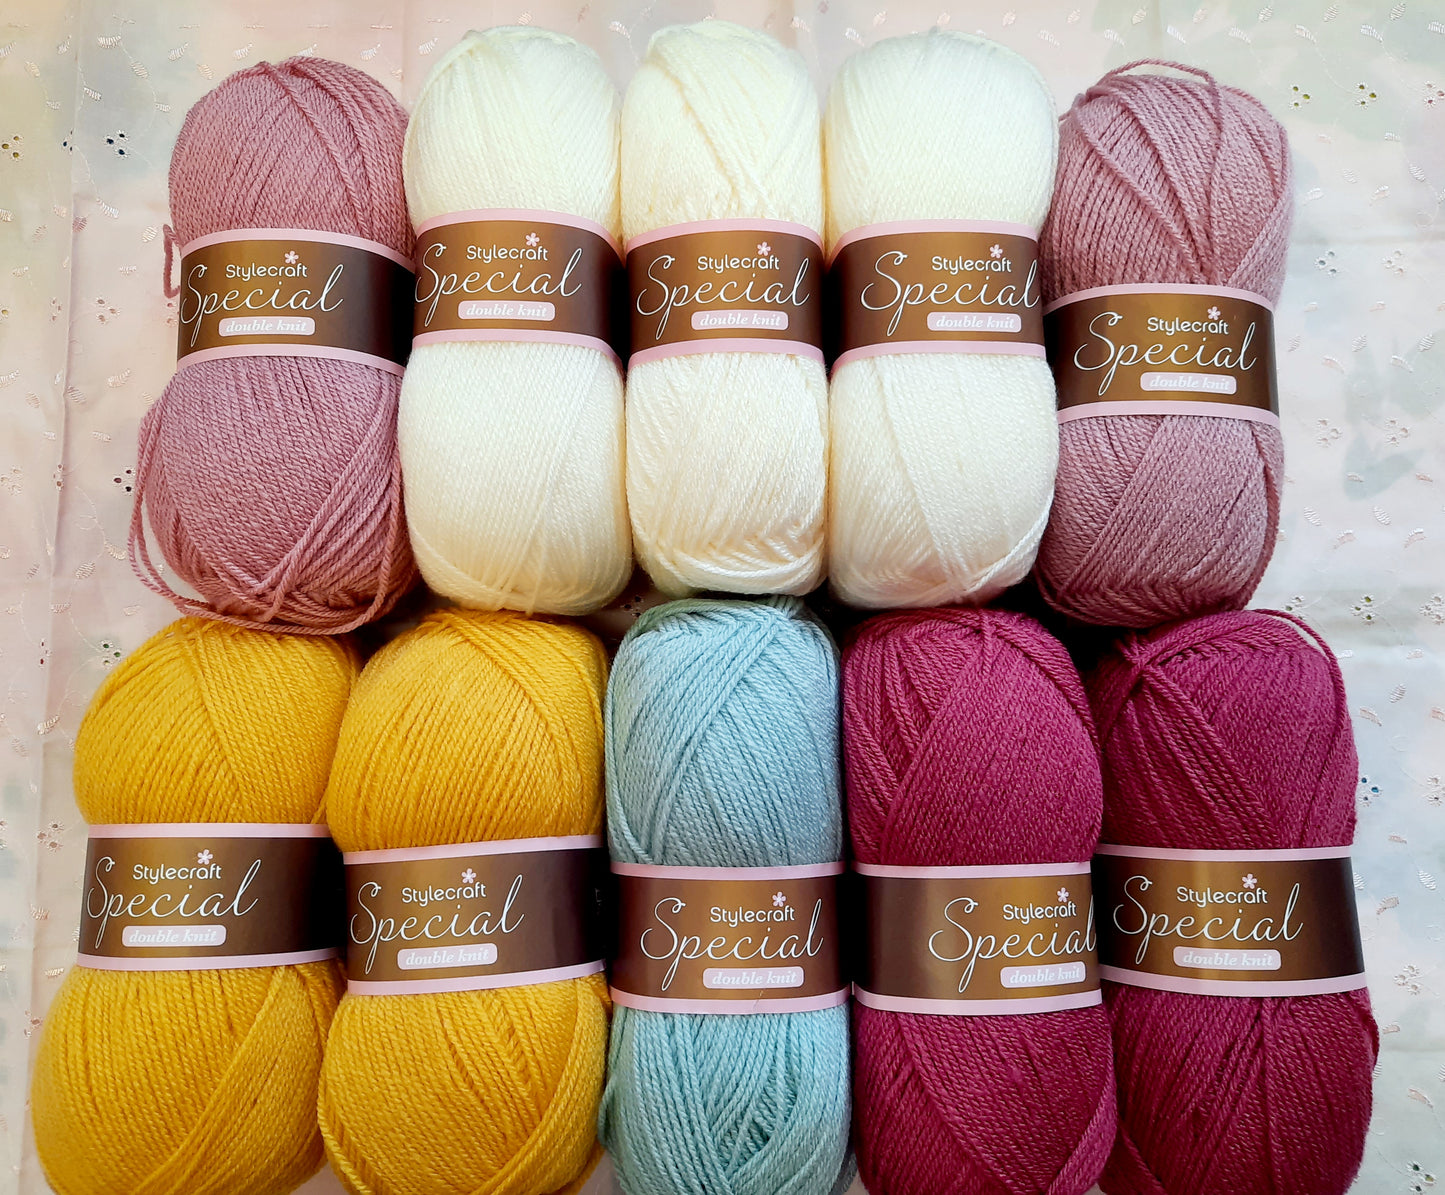 **NOW AVAILABLE!** Woman's Weekly Country Kitchen Charm Yarn Kit